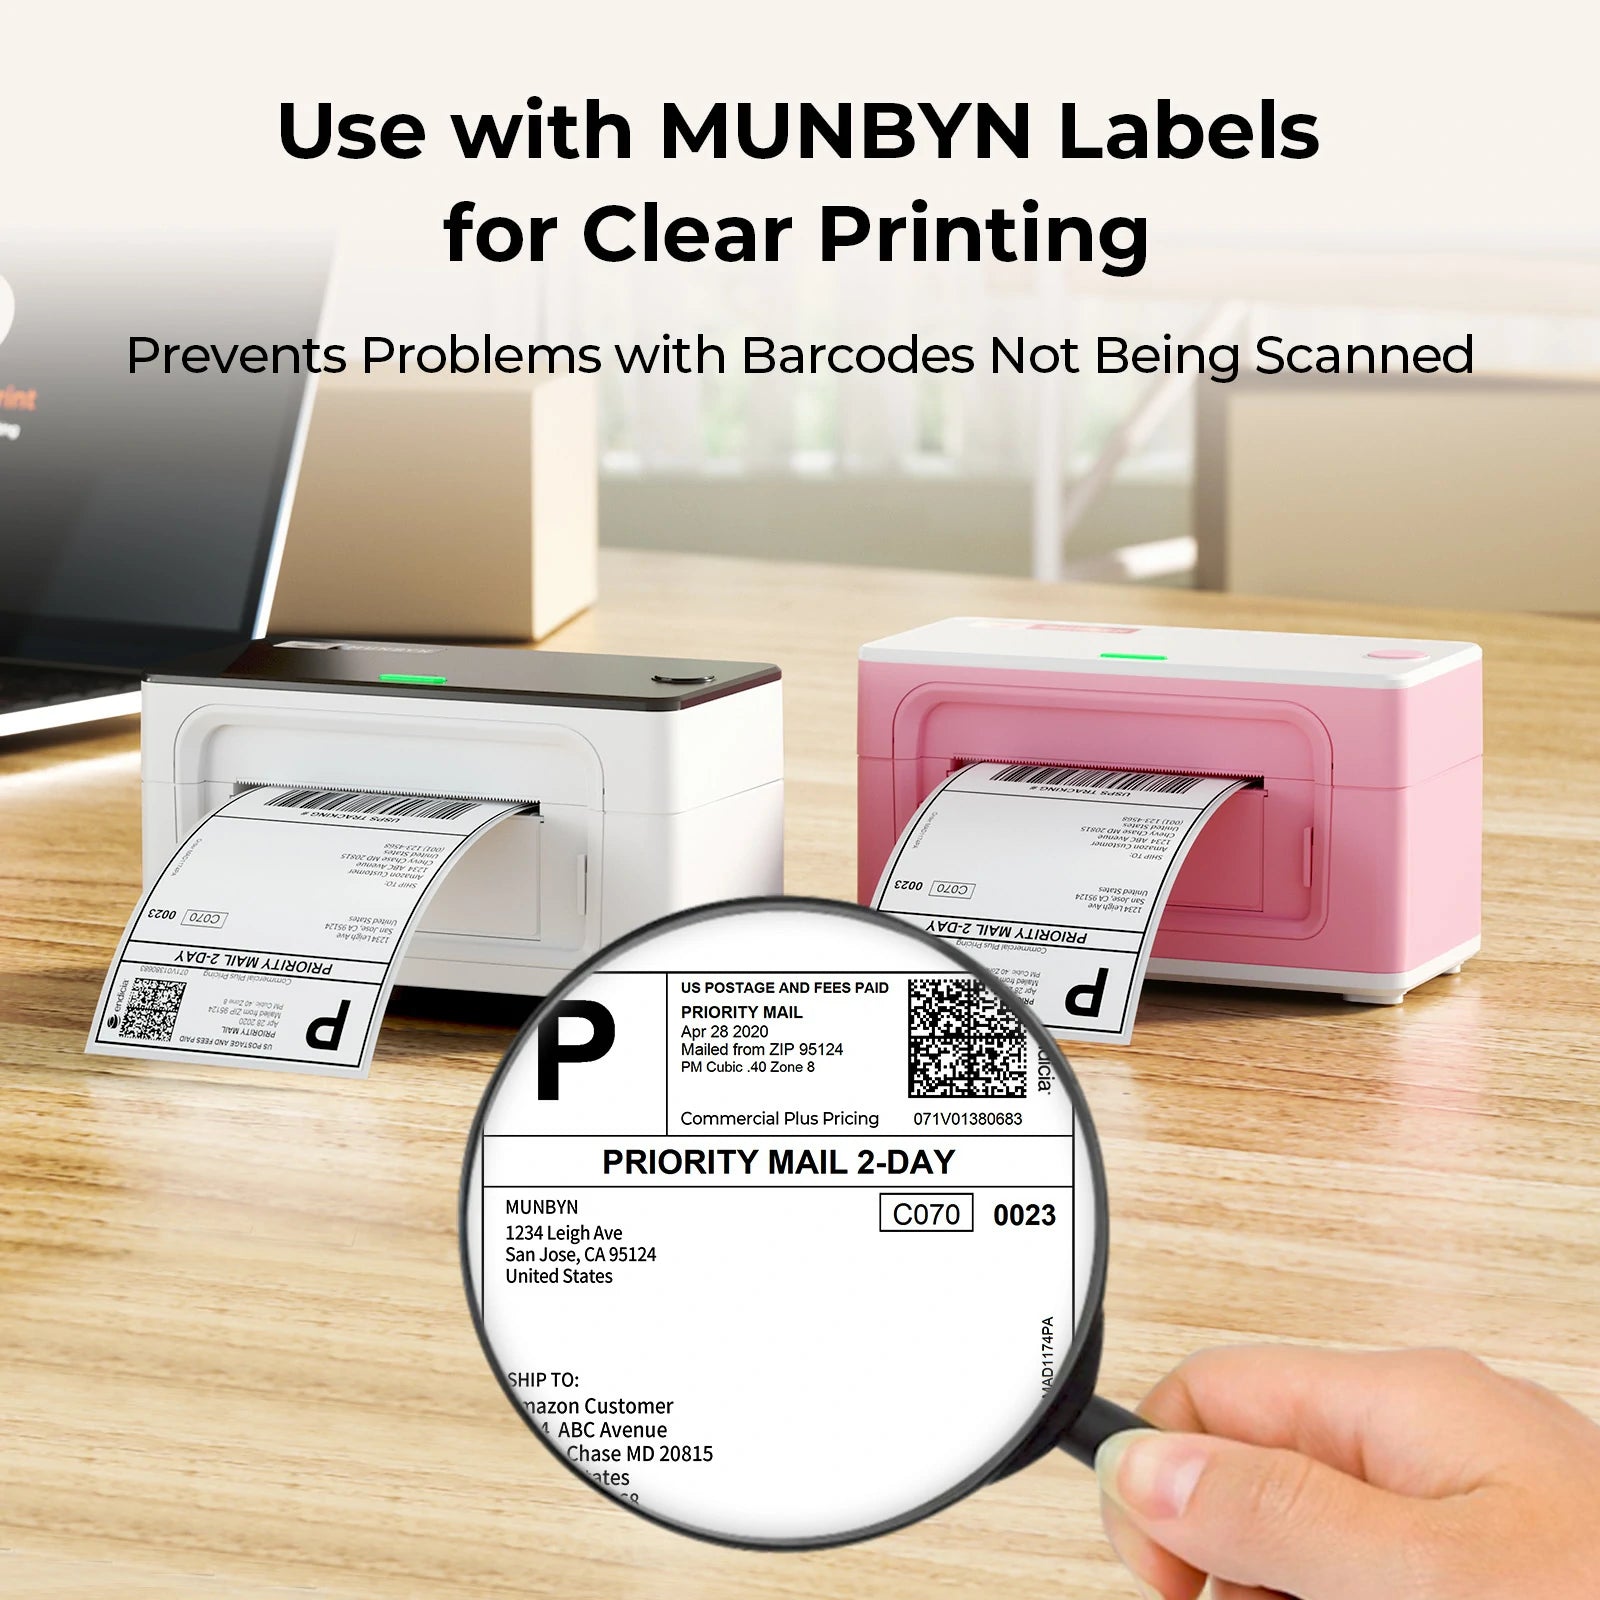 MUNBYN P941B thermal printer can print a wide range of labels, including barcode labels, shipping labels, product labels, and more.